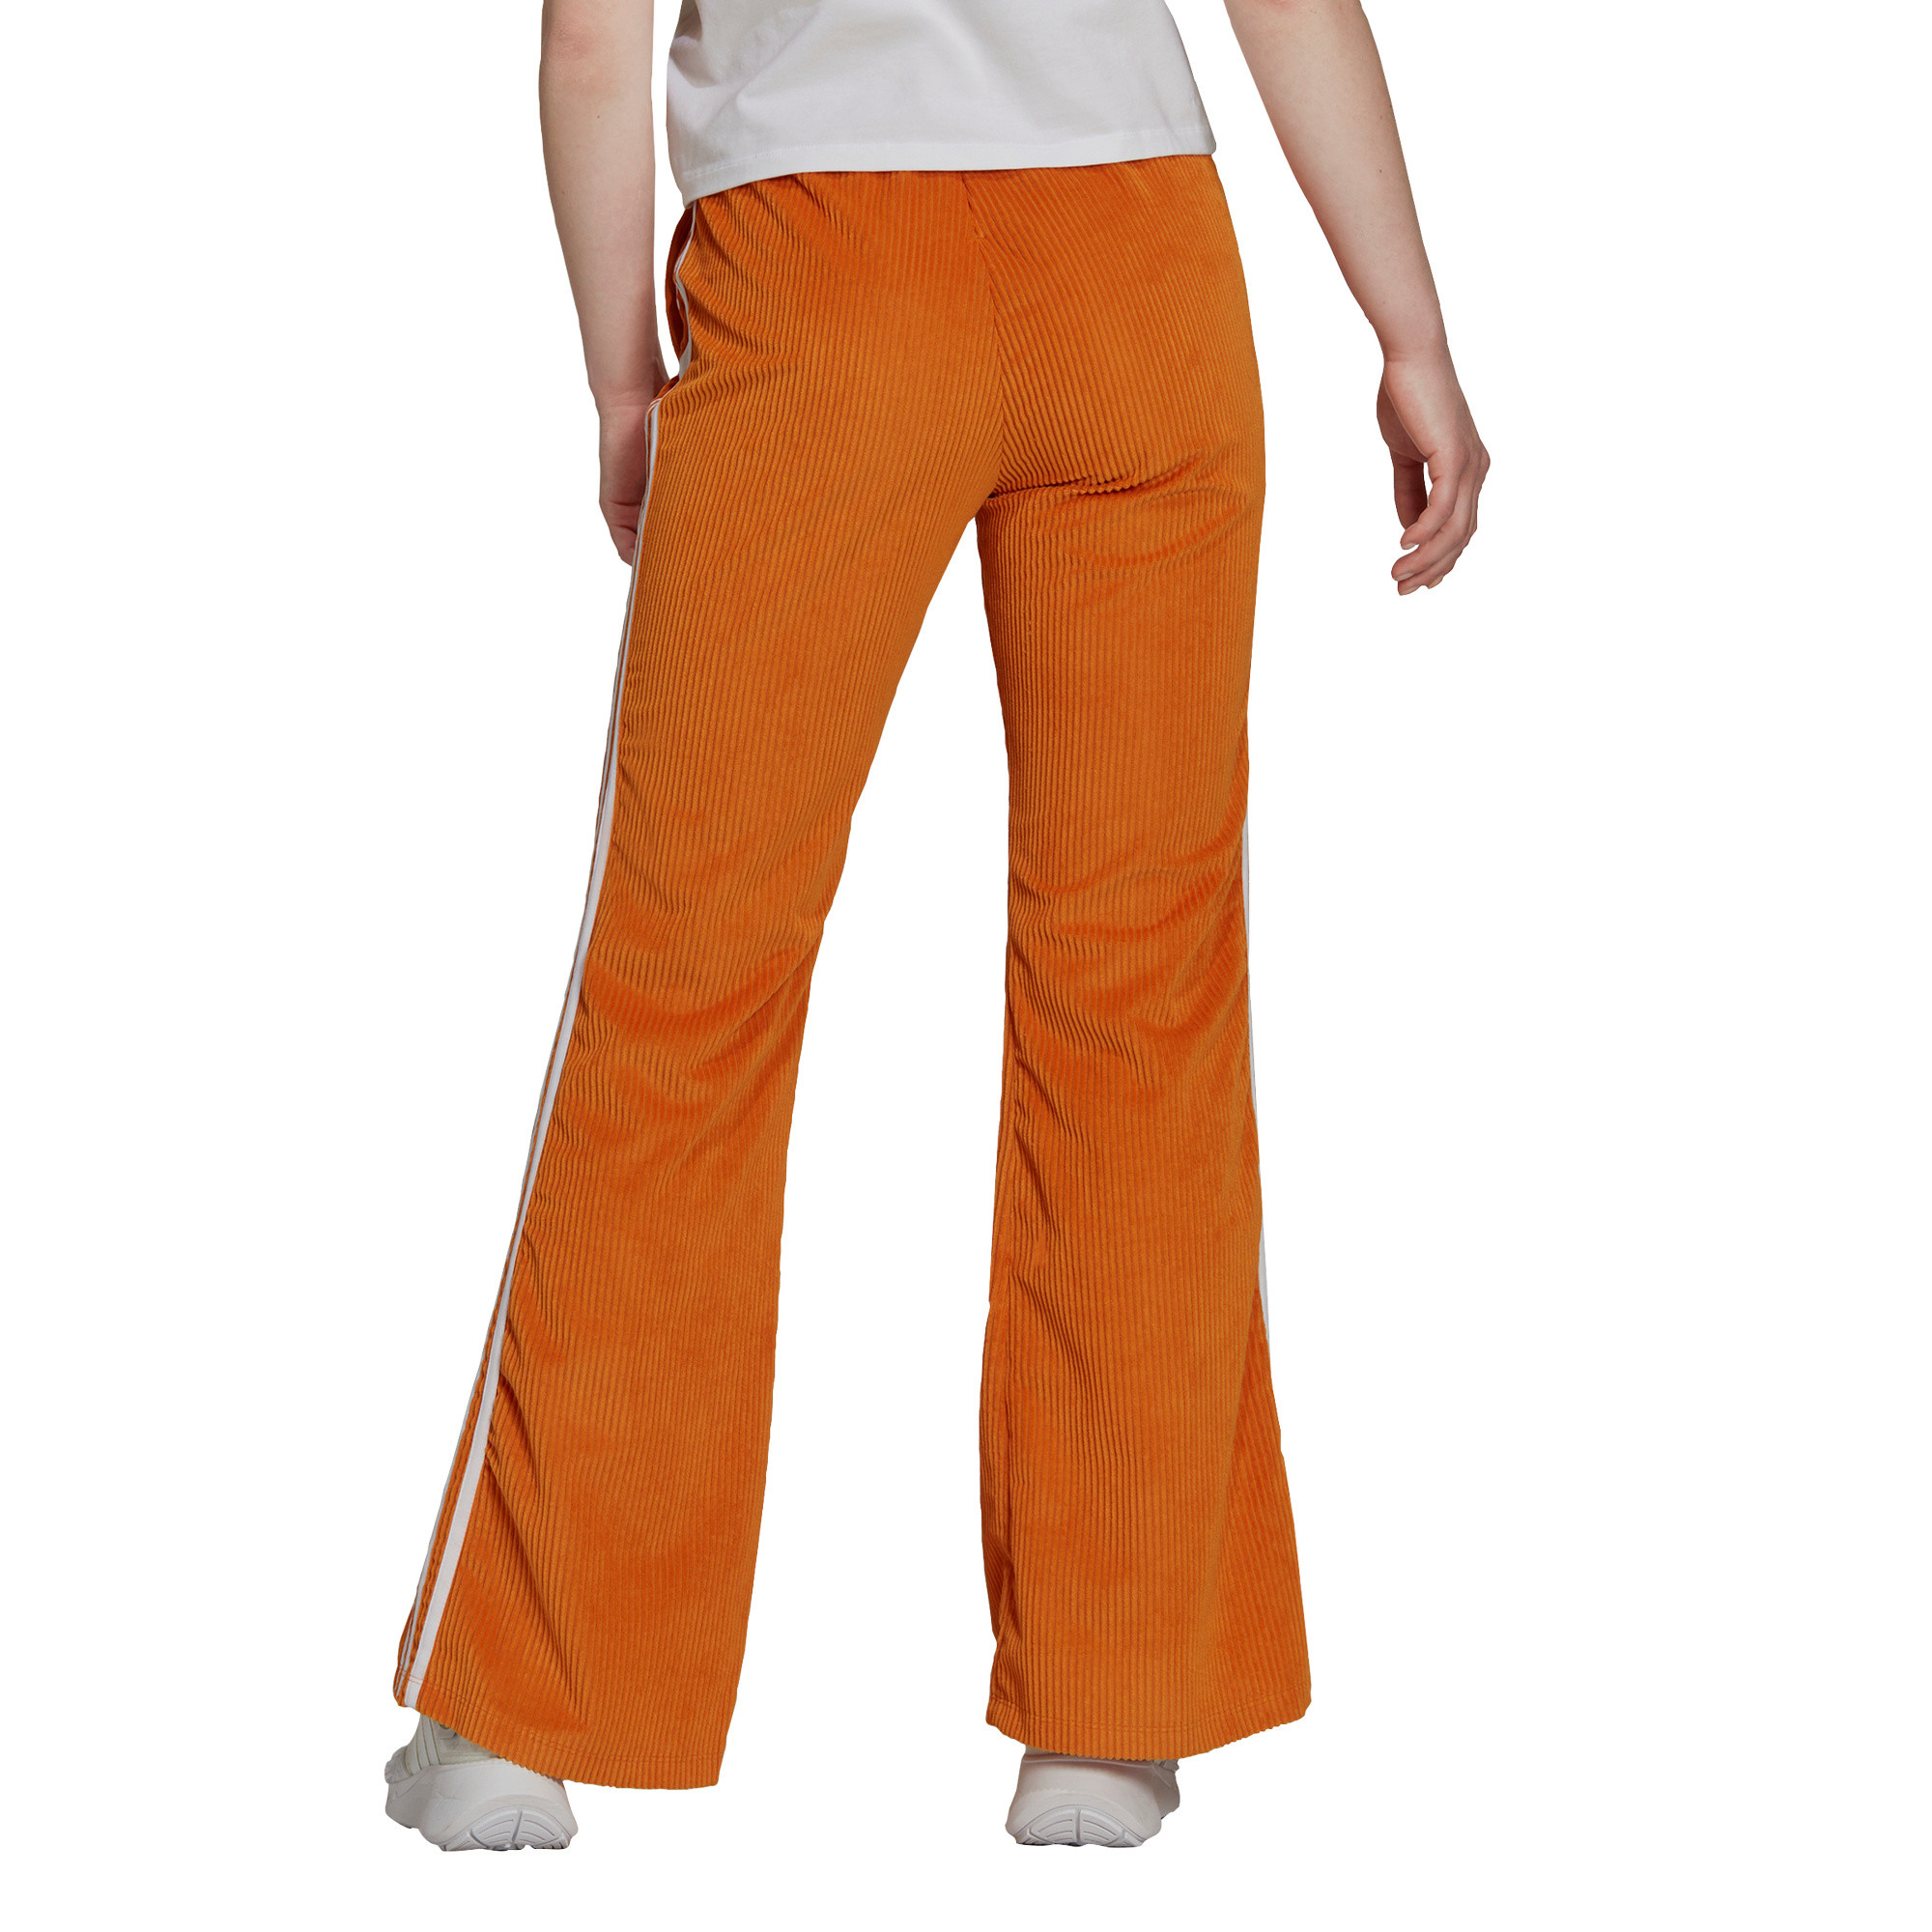 Relaxed Pant, Arancione, large image number 5